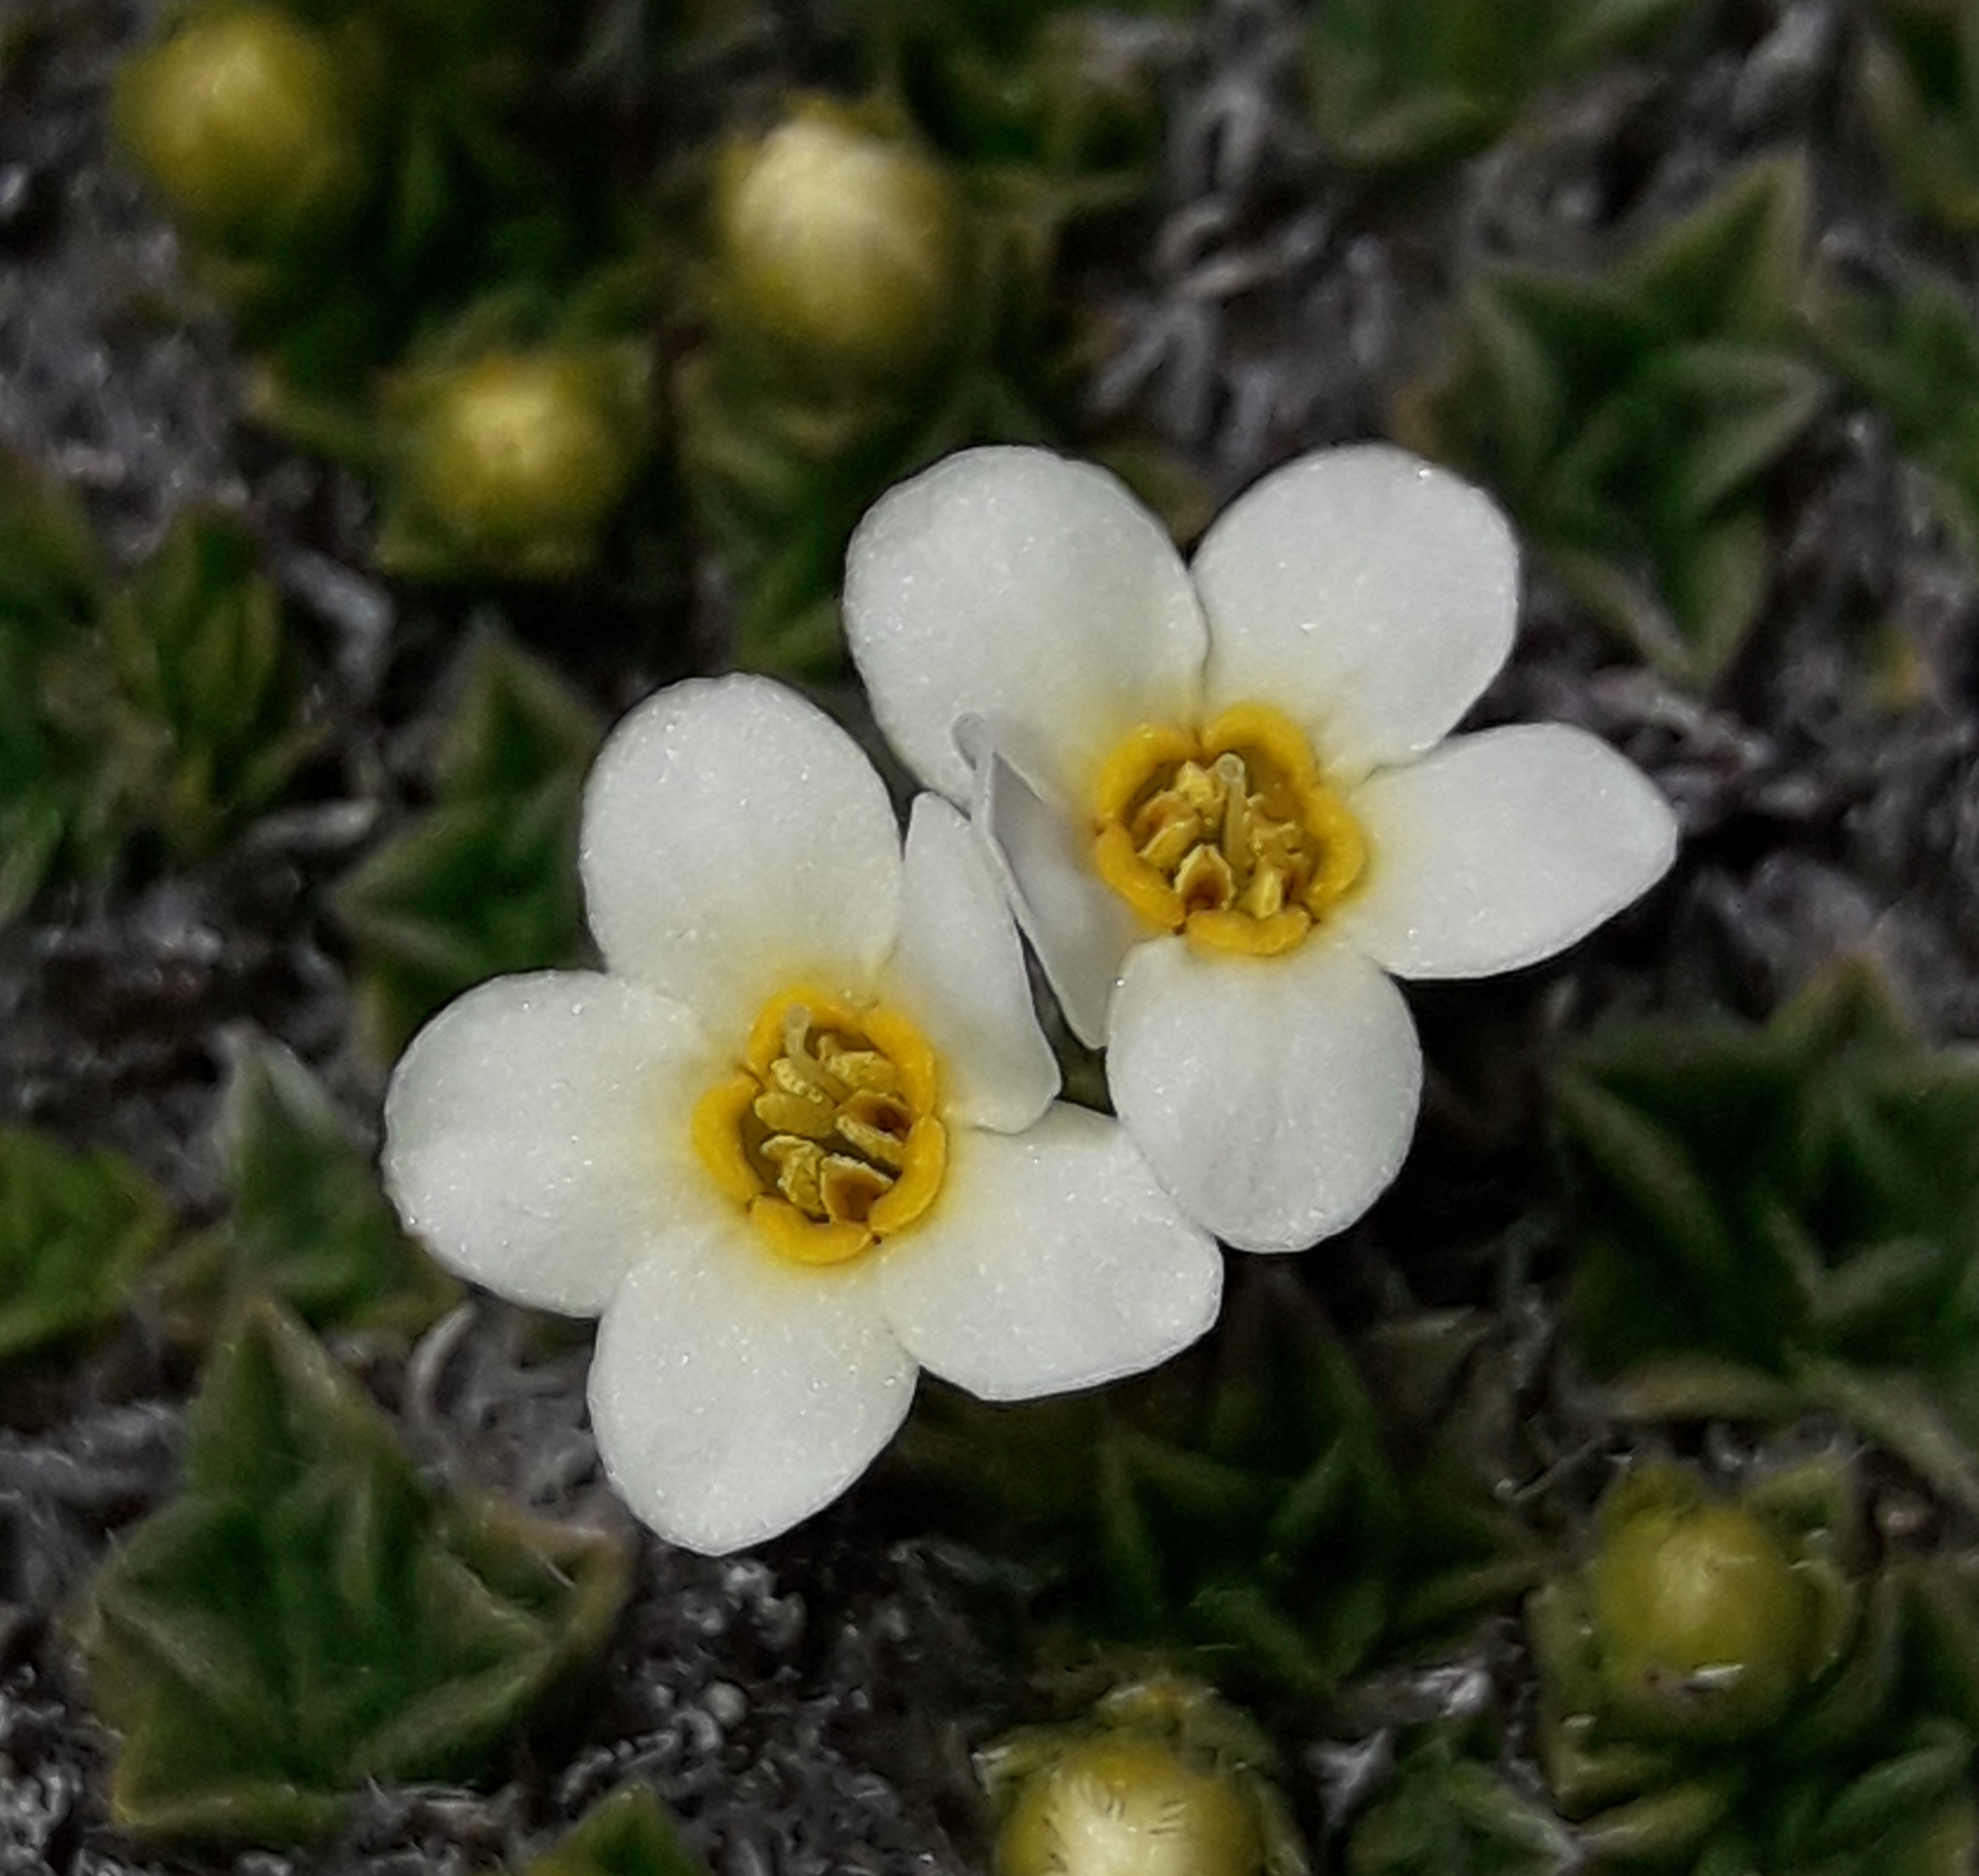 Two small white flowers on a dark leafy background.